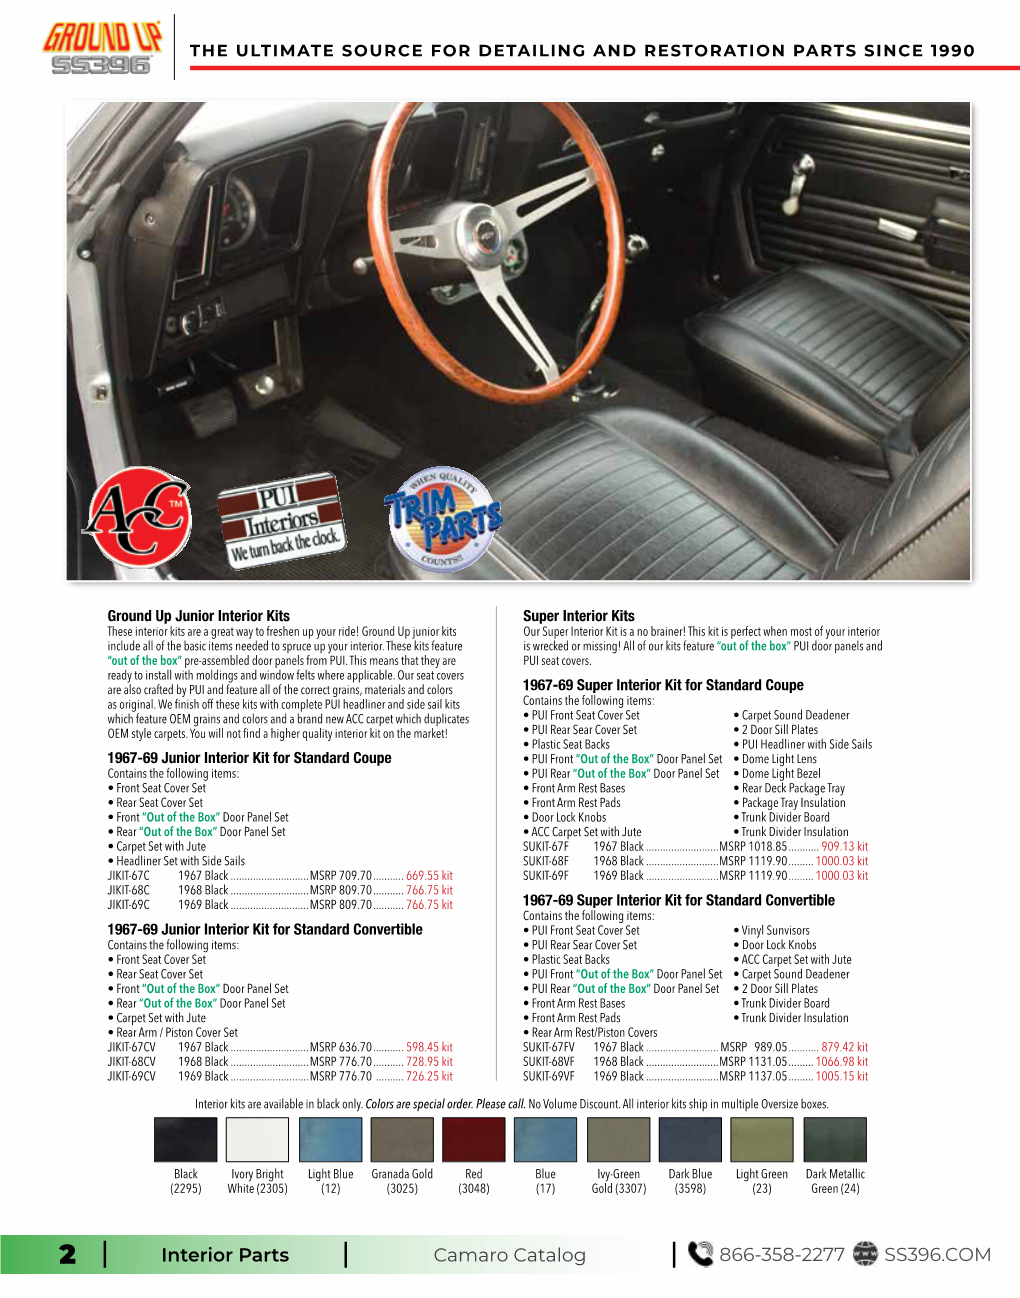 Interior Parts Camaro Catalog 866-358-2277 SS396.COM the ULTIMATE SOURCE for DETAILING and RESTORATION PARTS SINCE 1990